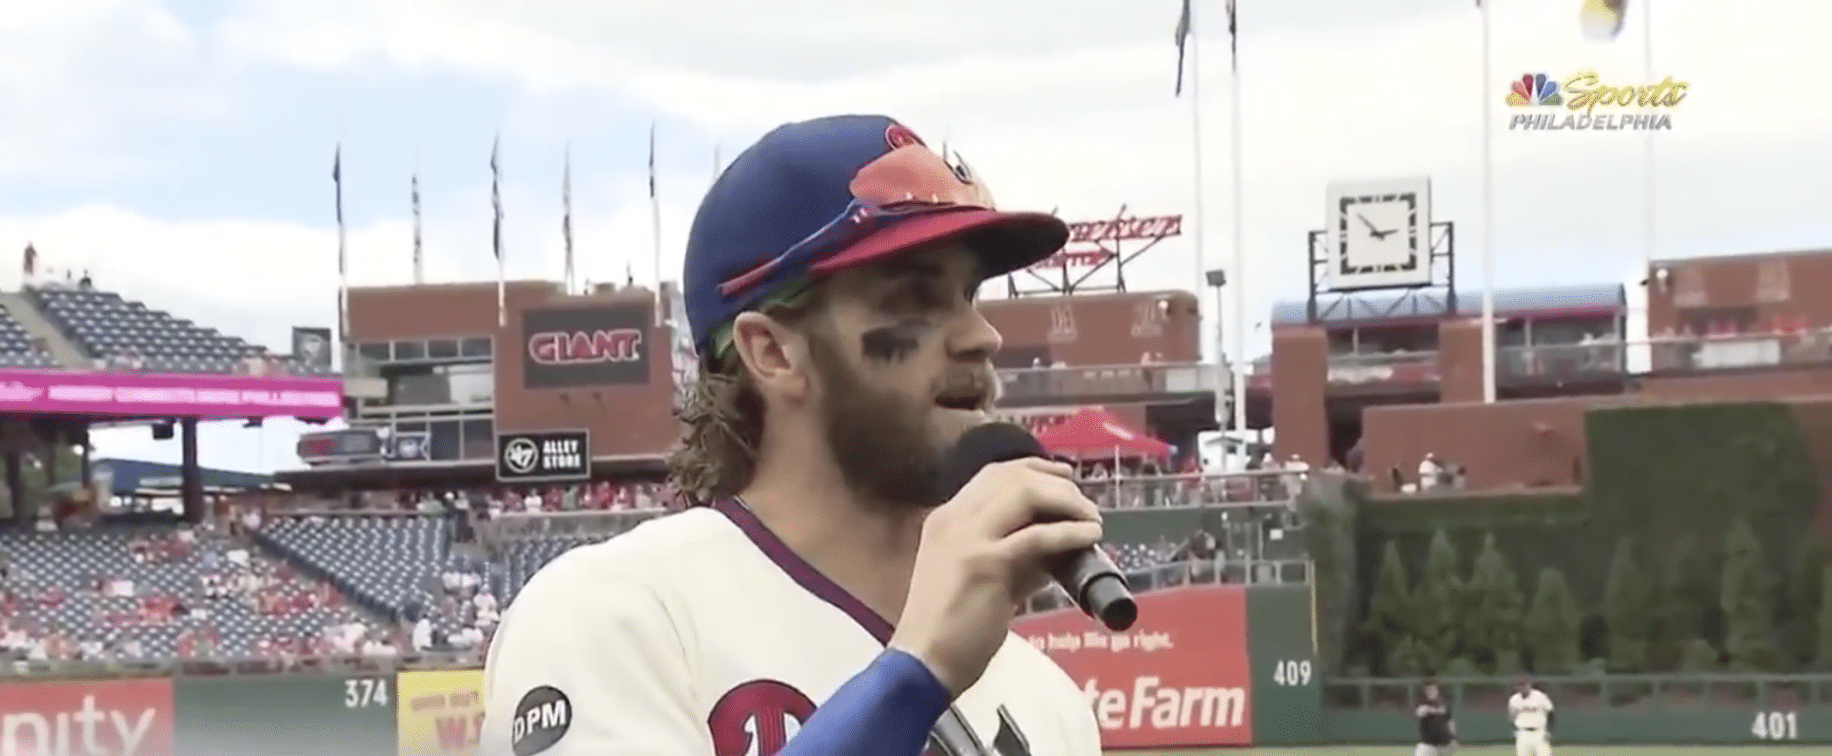 Bryce Harper Thanks Fans, Claims “We Will Reign Again”